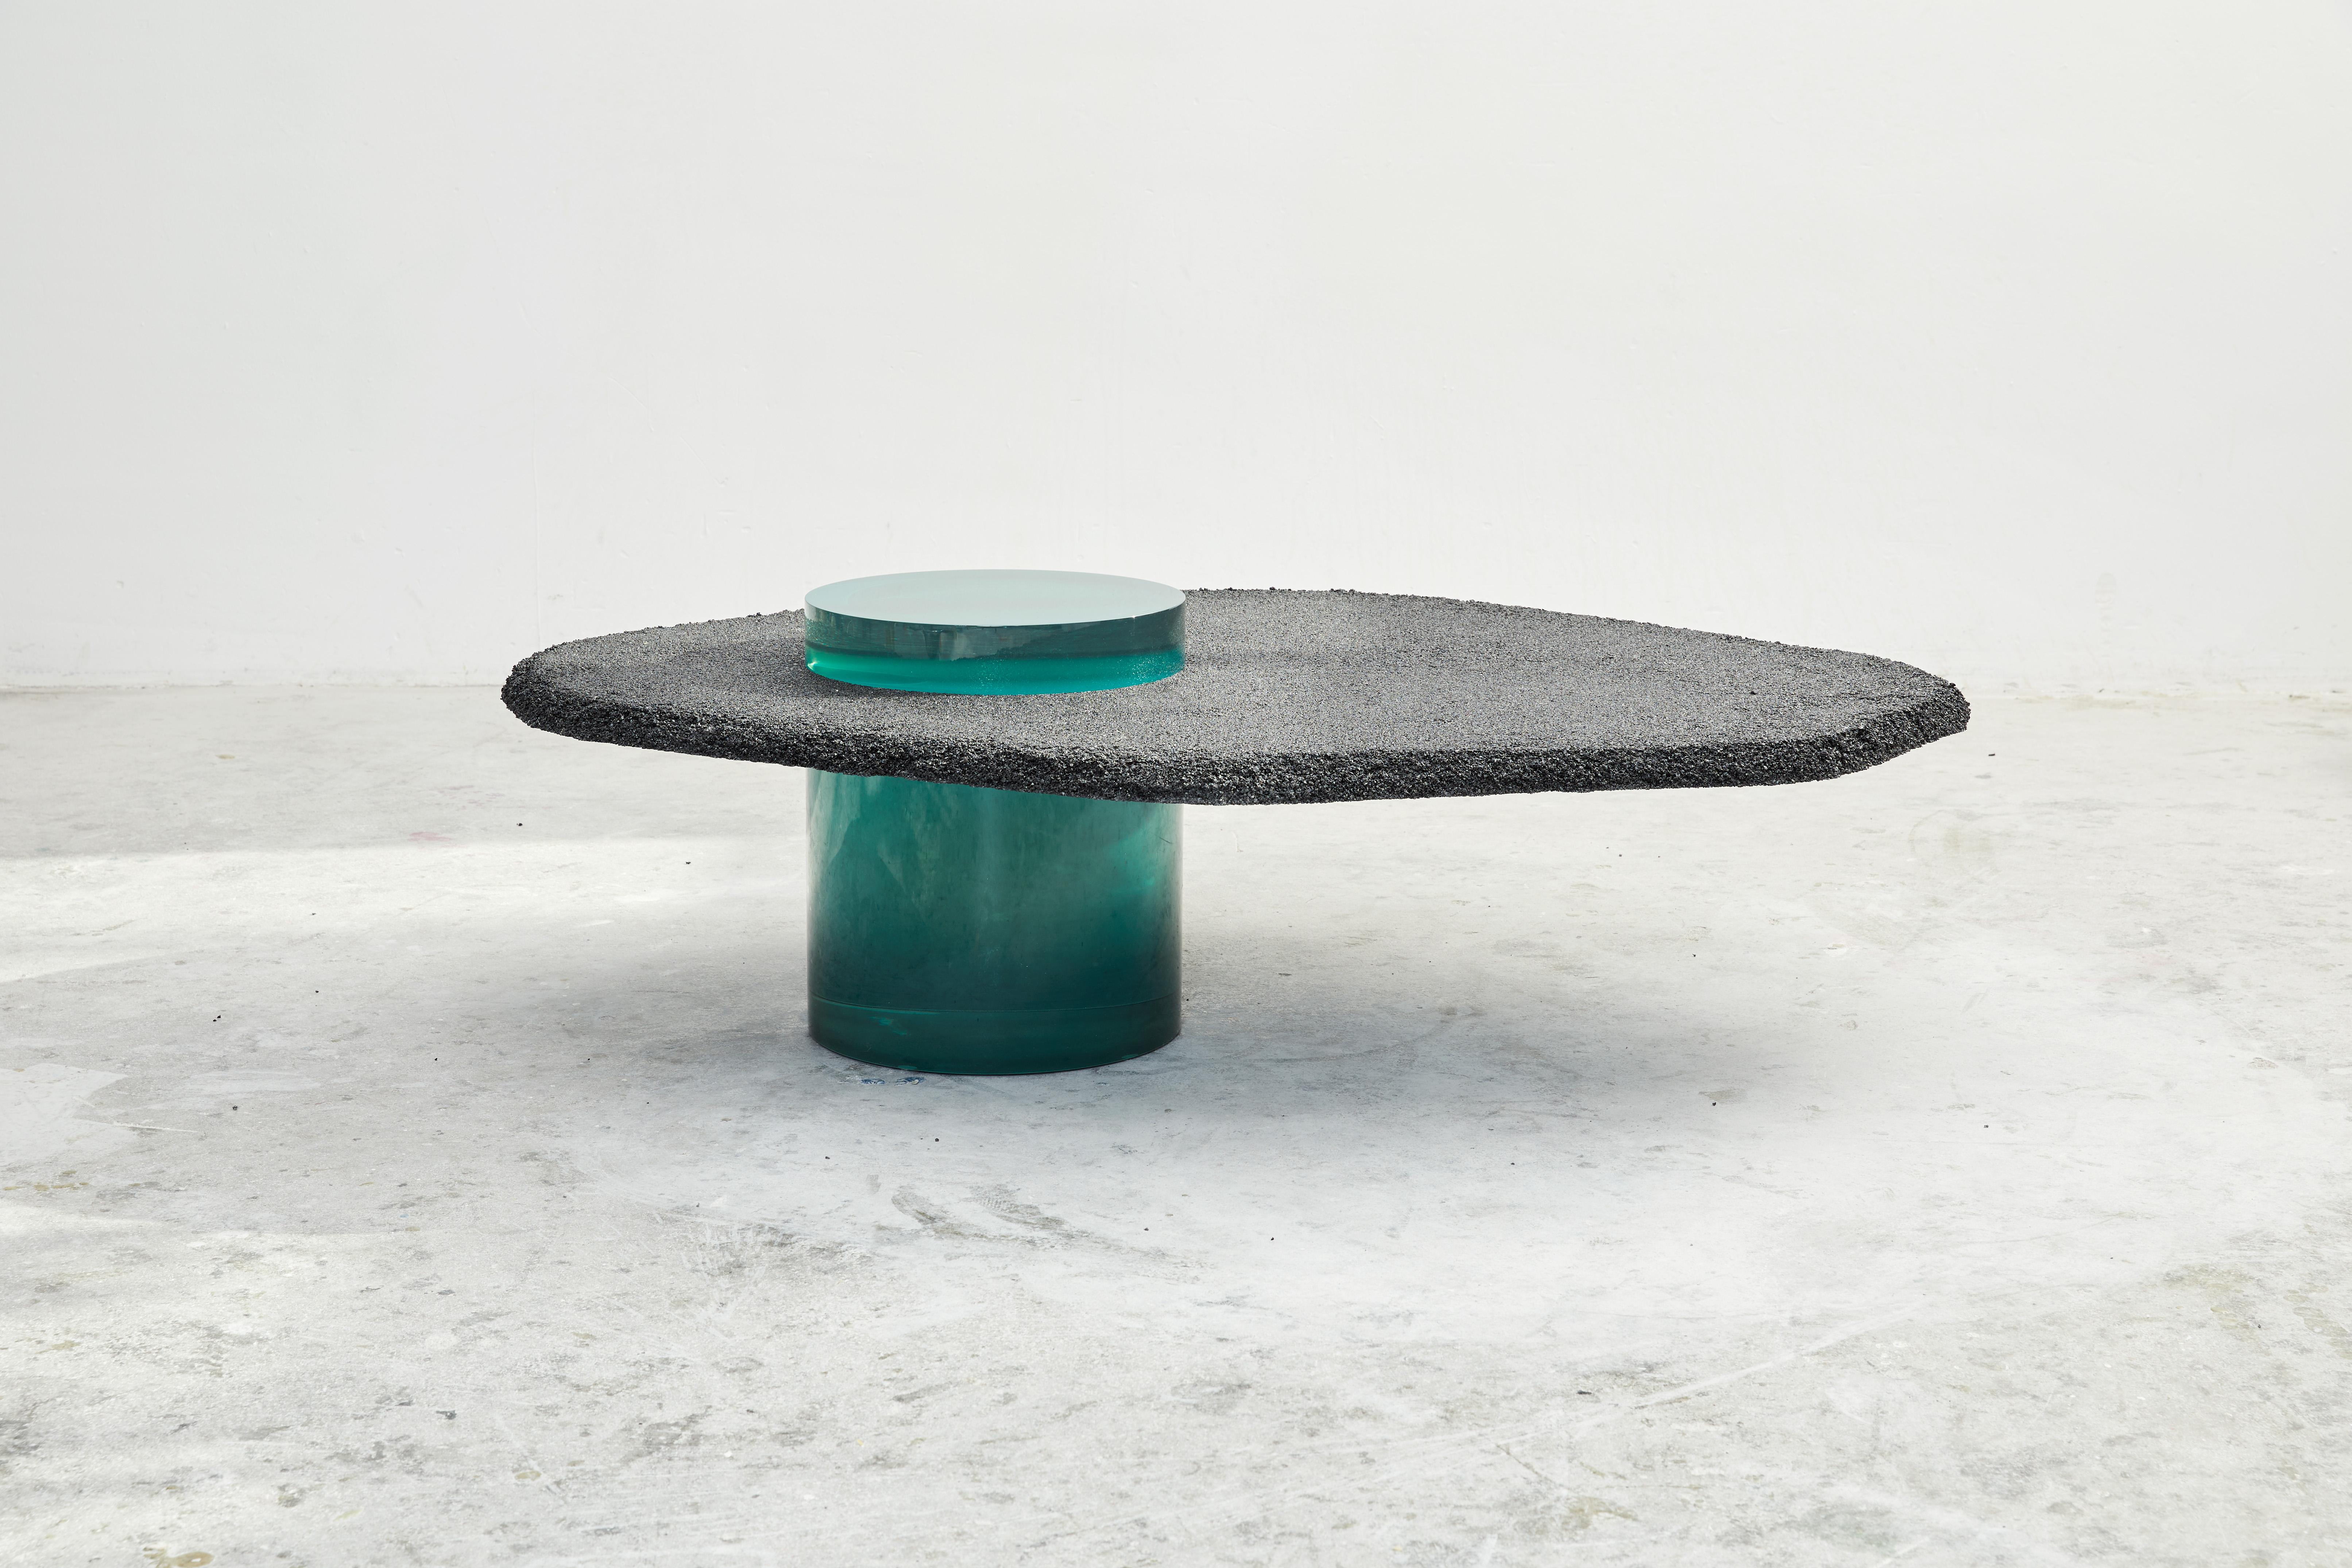 Asphalto coffee table by Cobra Studios
Dimensions: 110 x 140 x 40 cm
Materials: Resin
 Tabletop: natural aggregates mixed with a colored solidifier
 
Solids collection 
The solids collection is a family of dinner tables, coffee tables, side